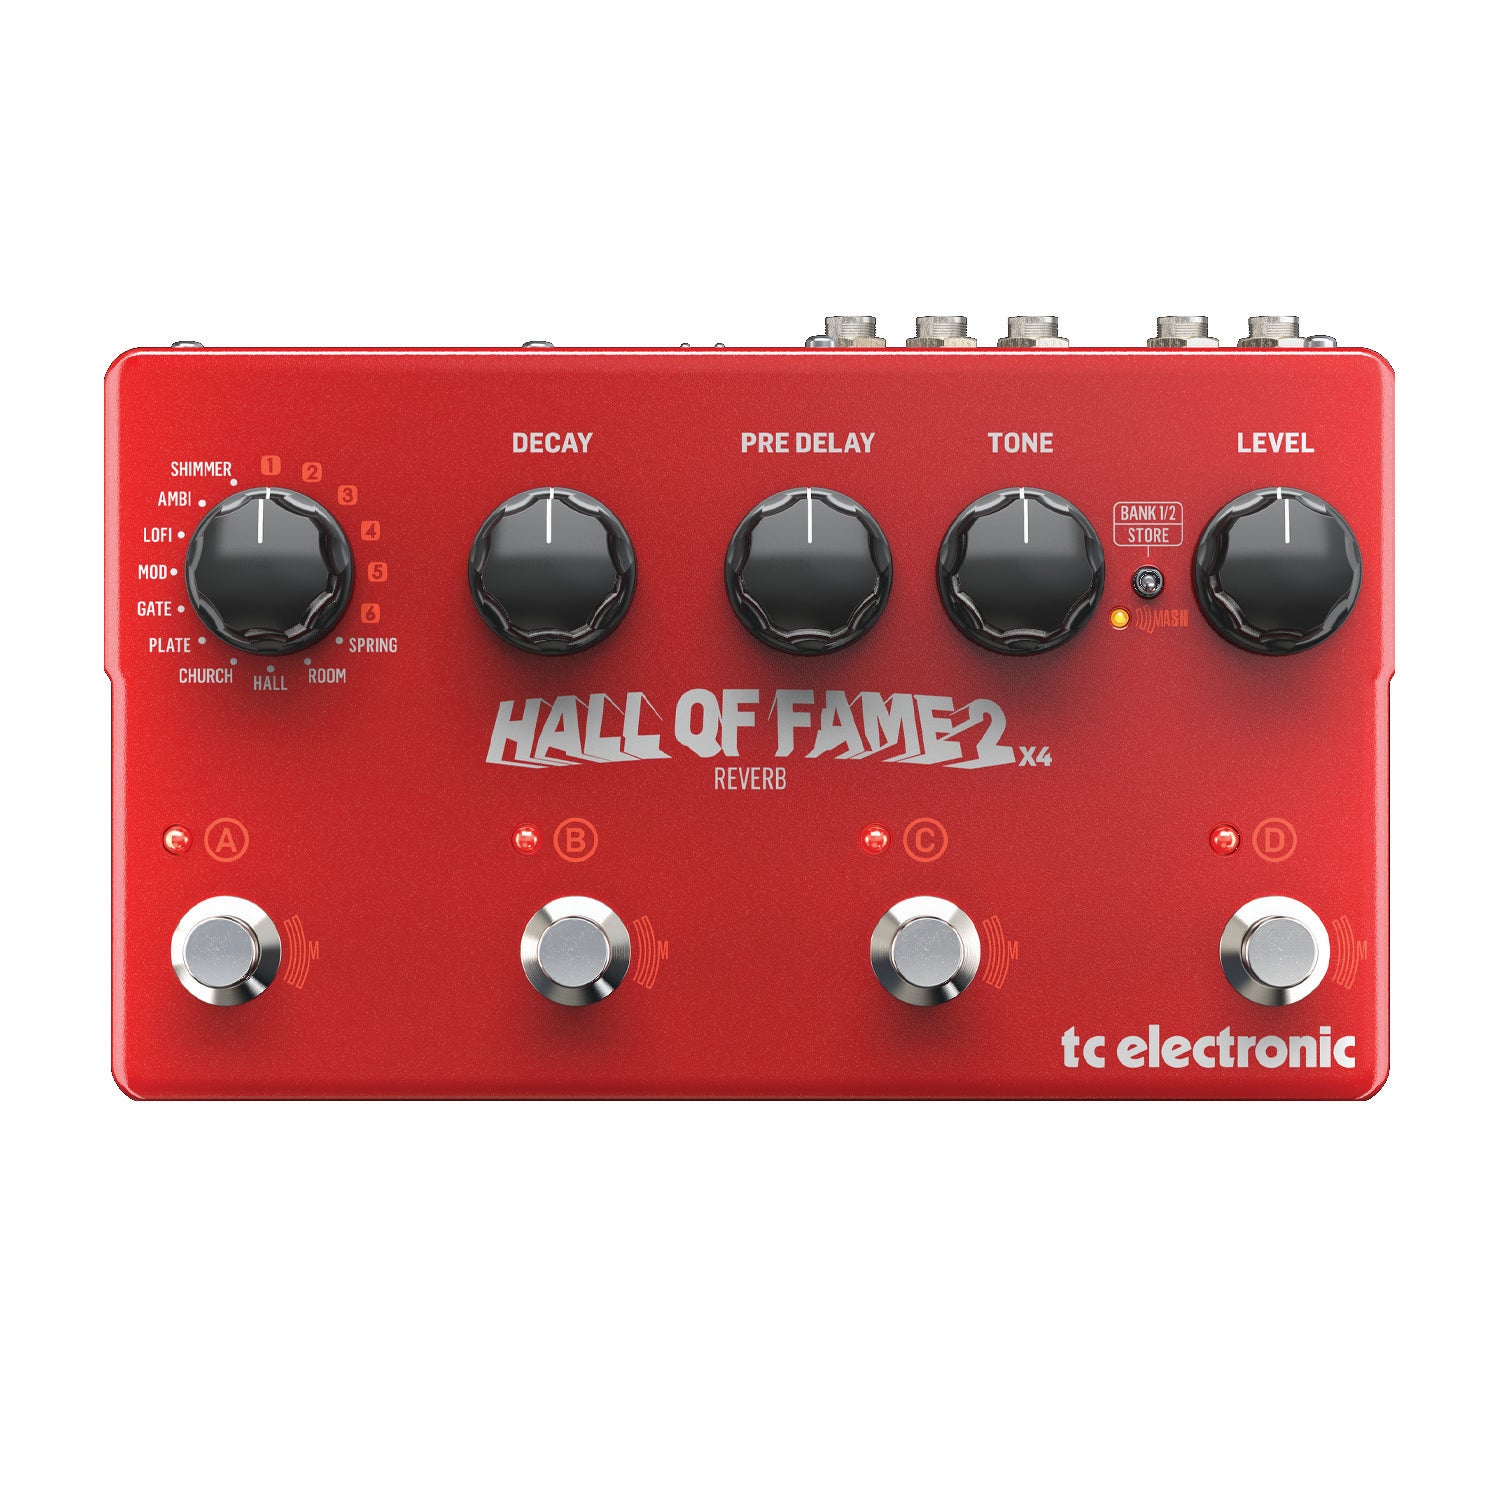 Tc Electronic Hall Of Fame 2 X4 Reverb Guitar Effects Pedal | Music 